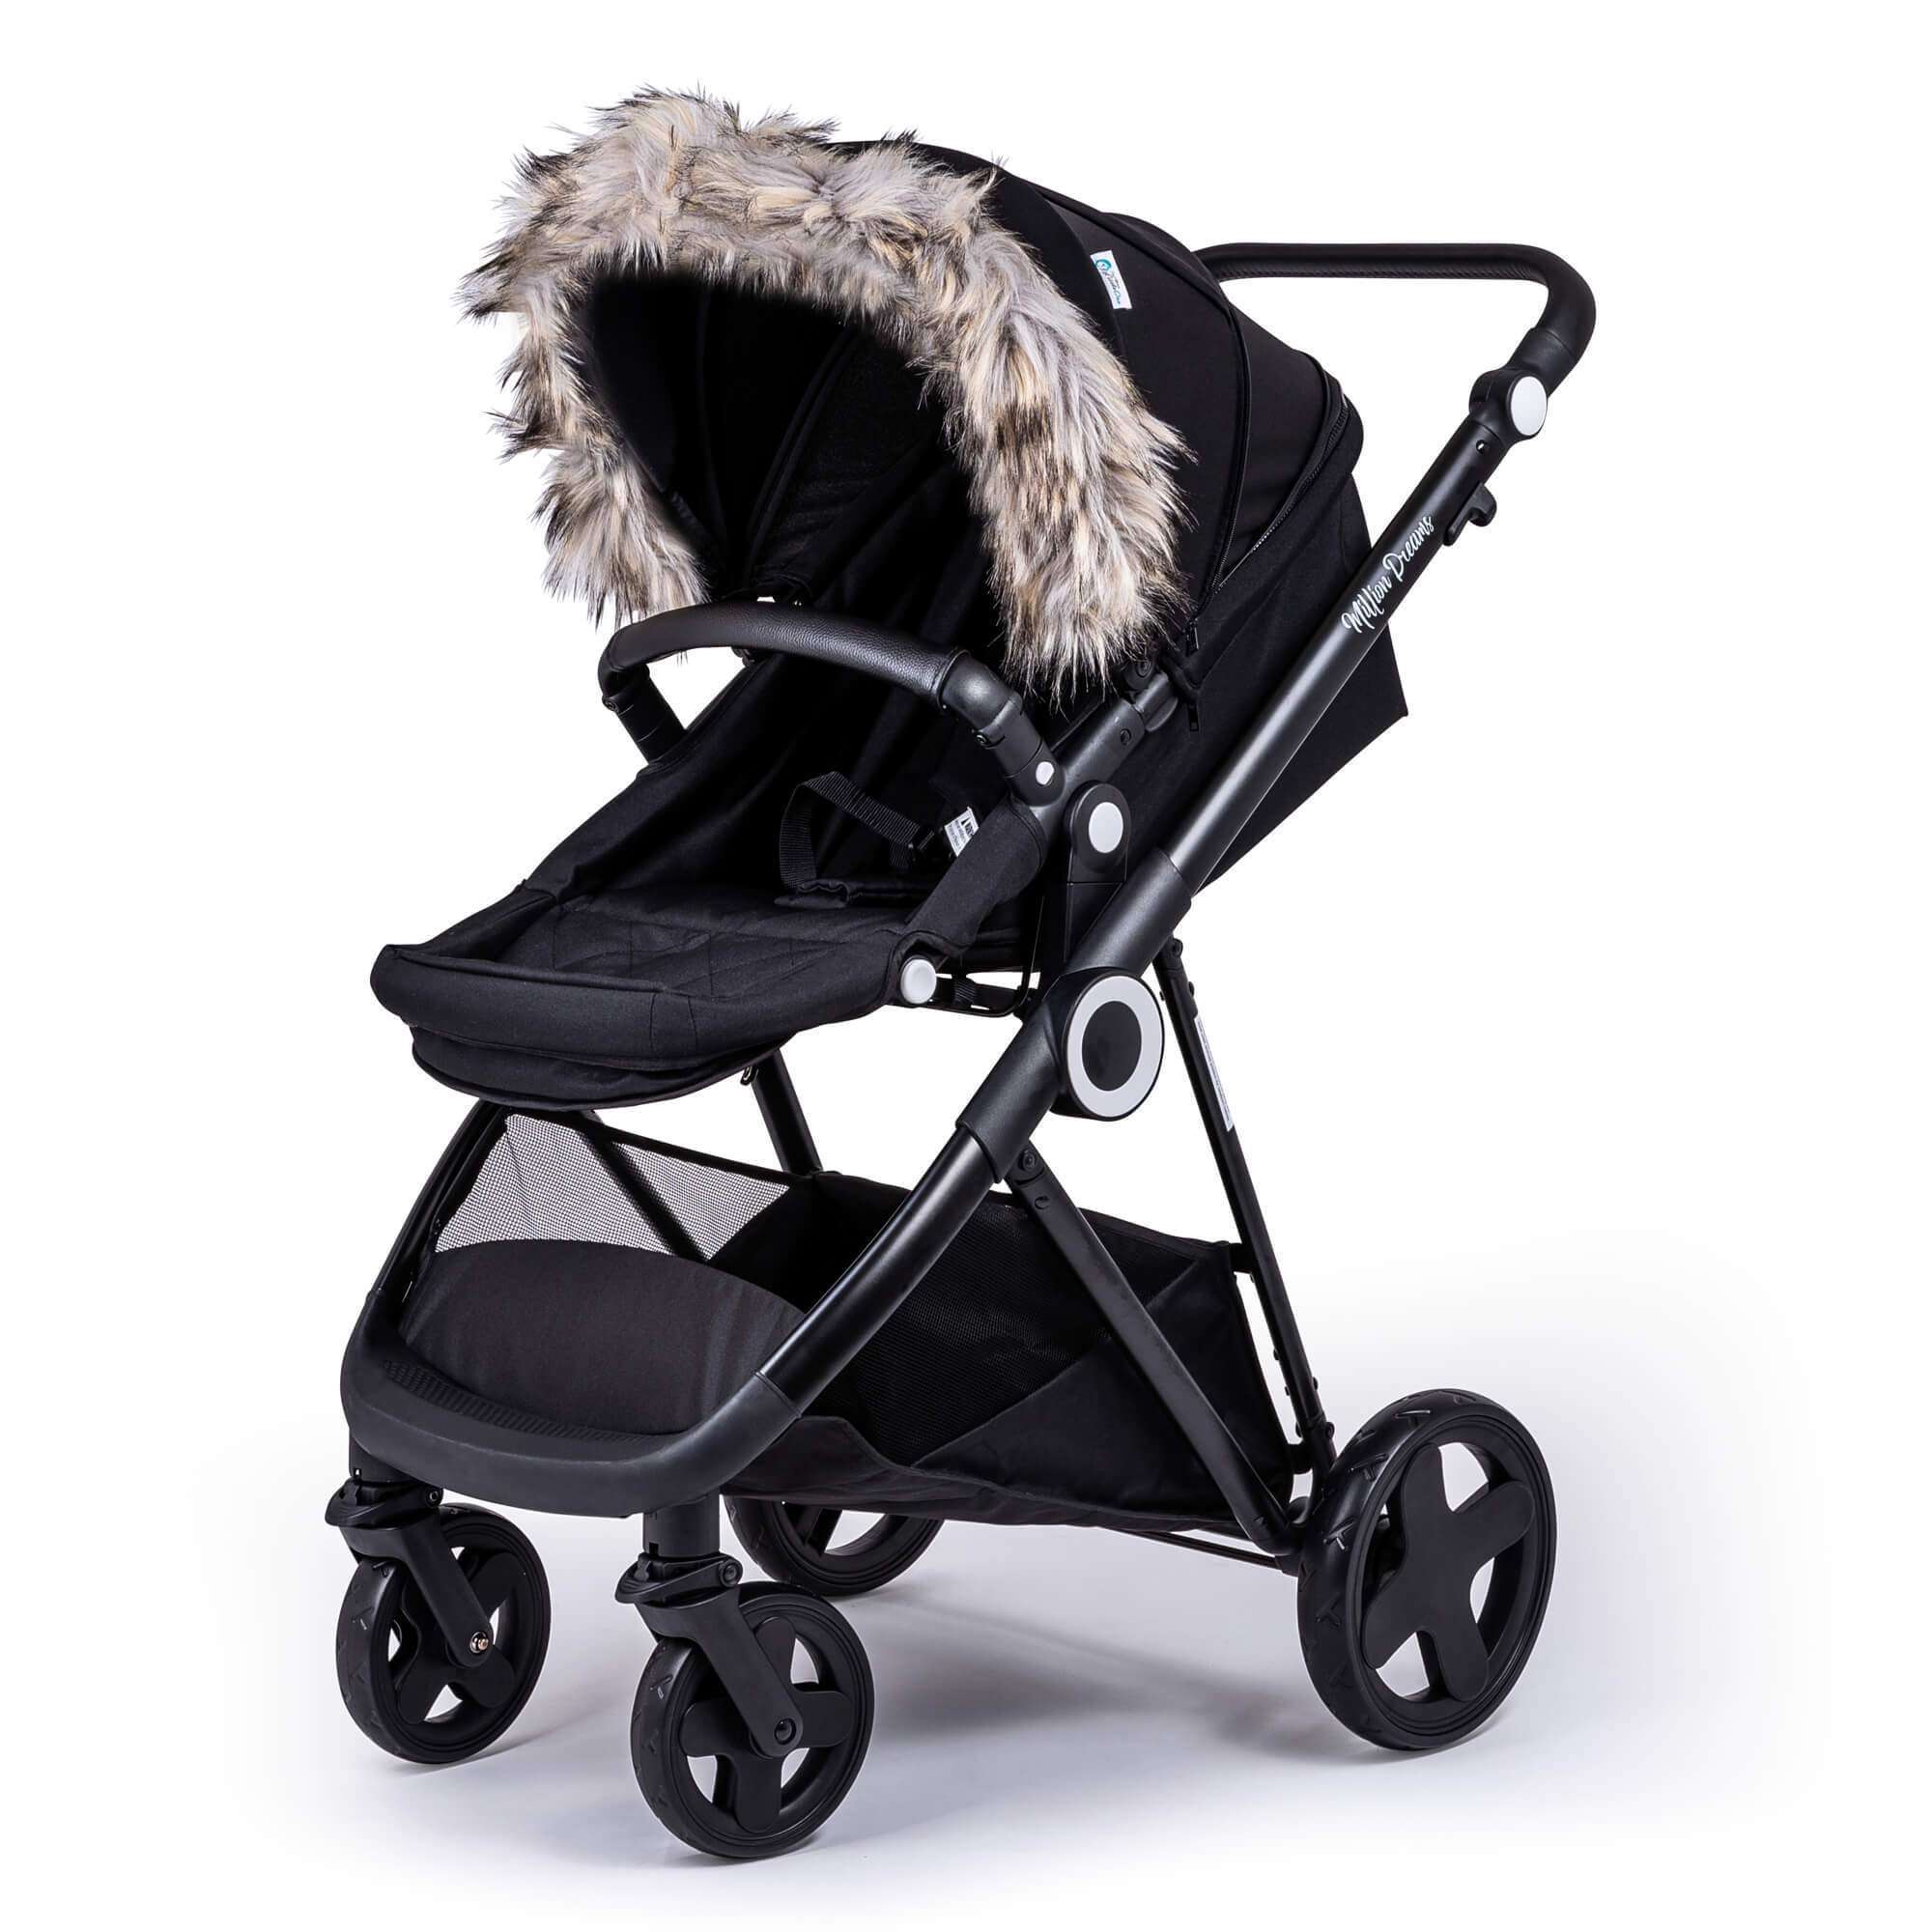 Pram Fur Hood Trim Attachment for Pushchair Compatible with Brio - Light Grey / Fits All Models | For Your Little One